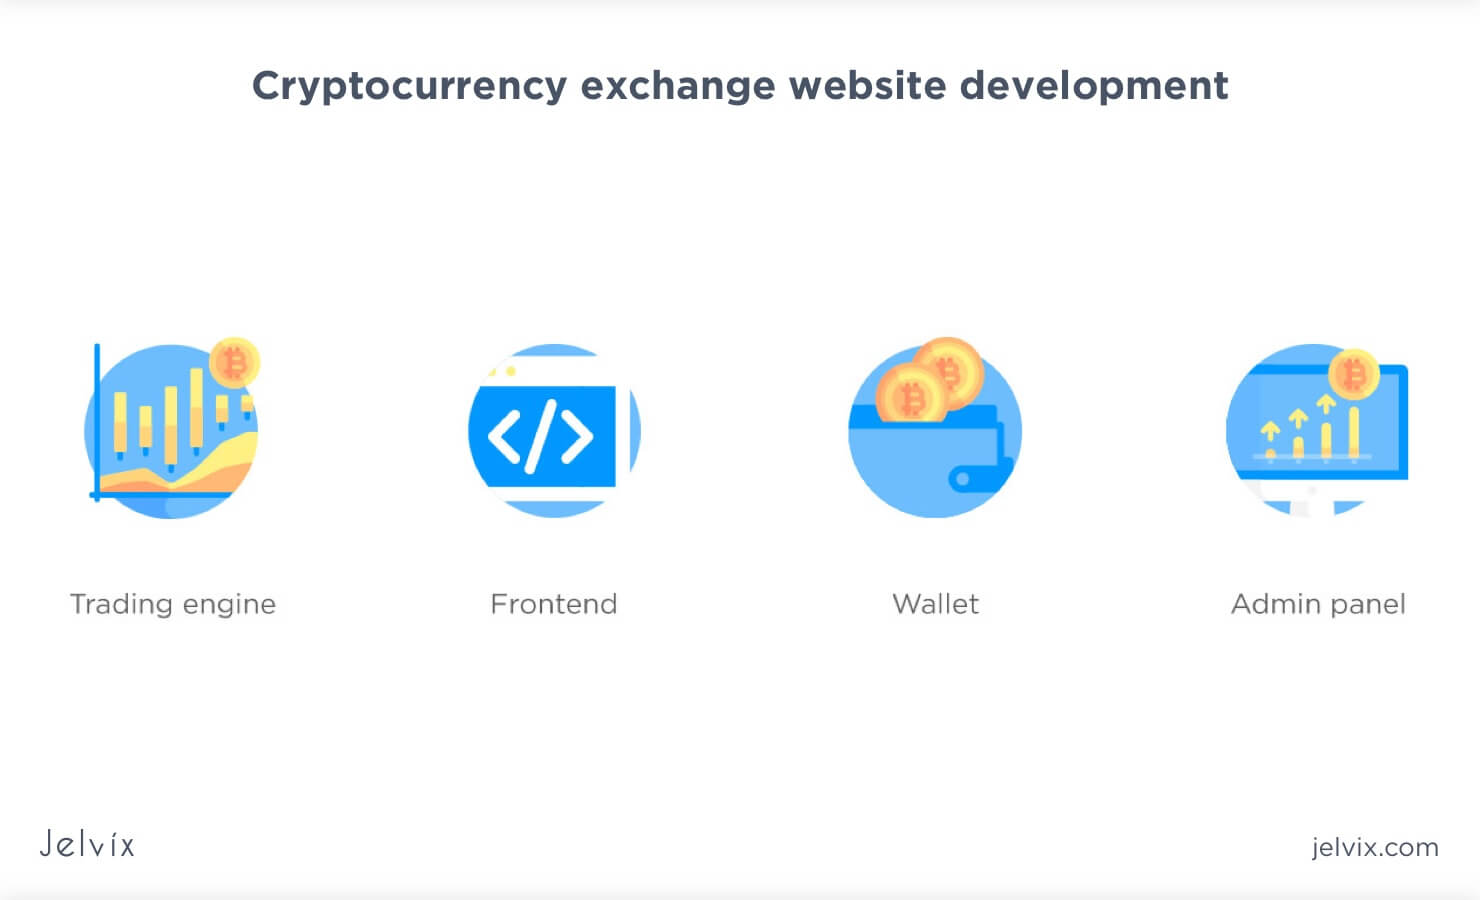 How to Create a Cryptocurrency Exchange Platfrom - Jelvix